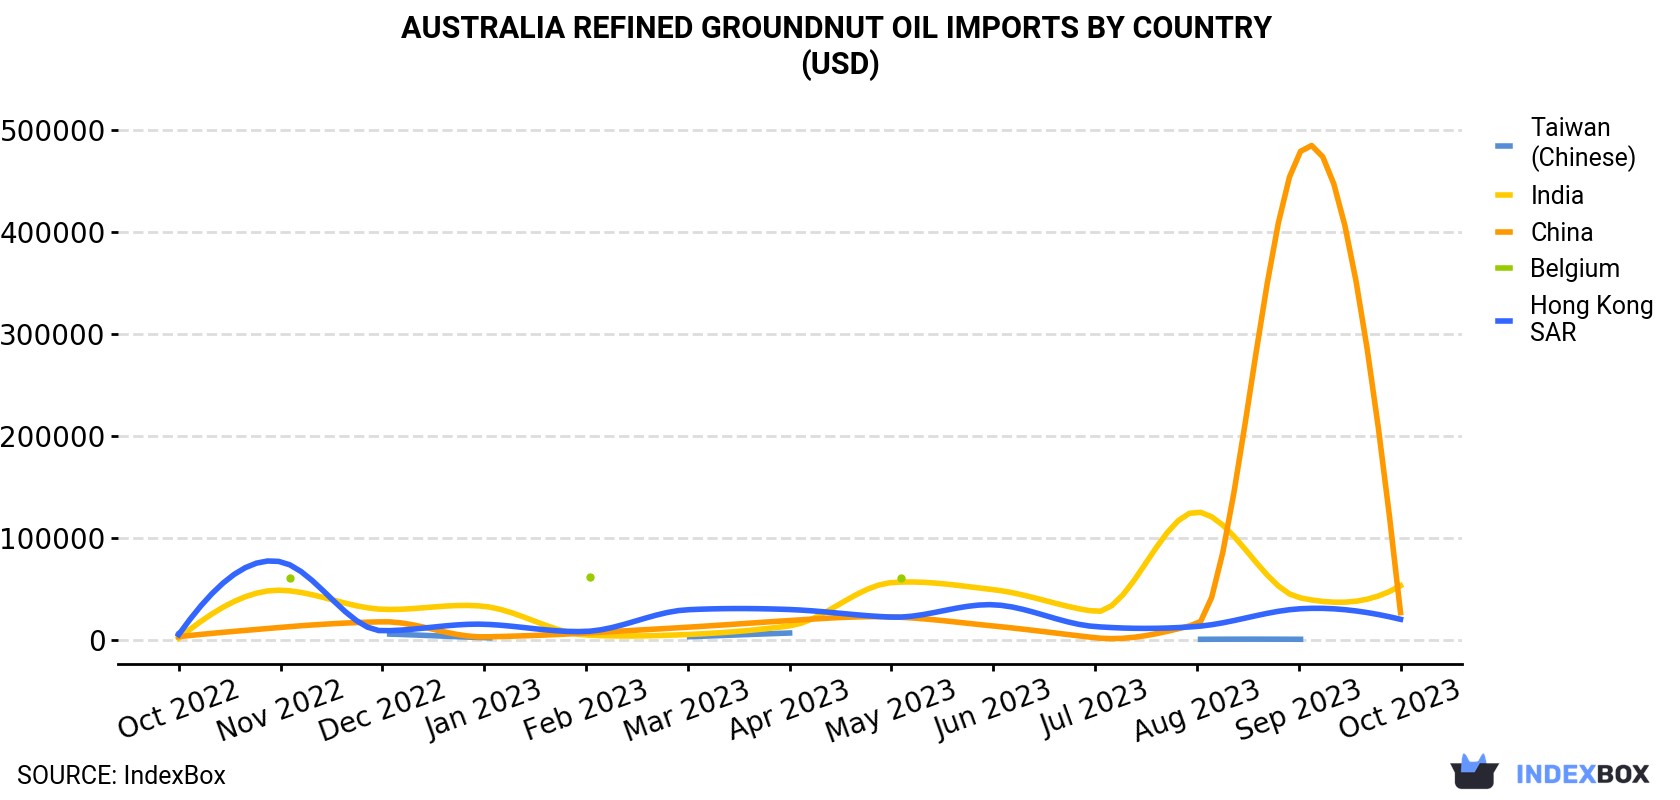 Australia Refined Groundnut Oil Imports By Country (USD)